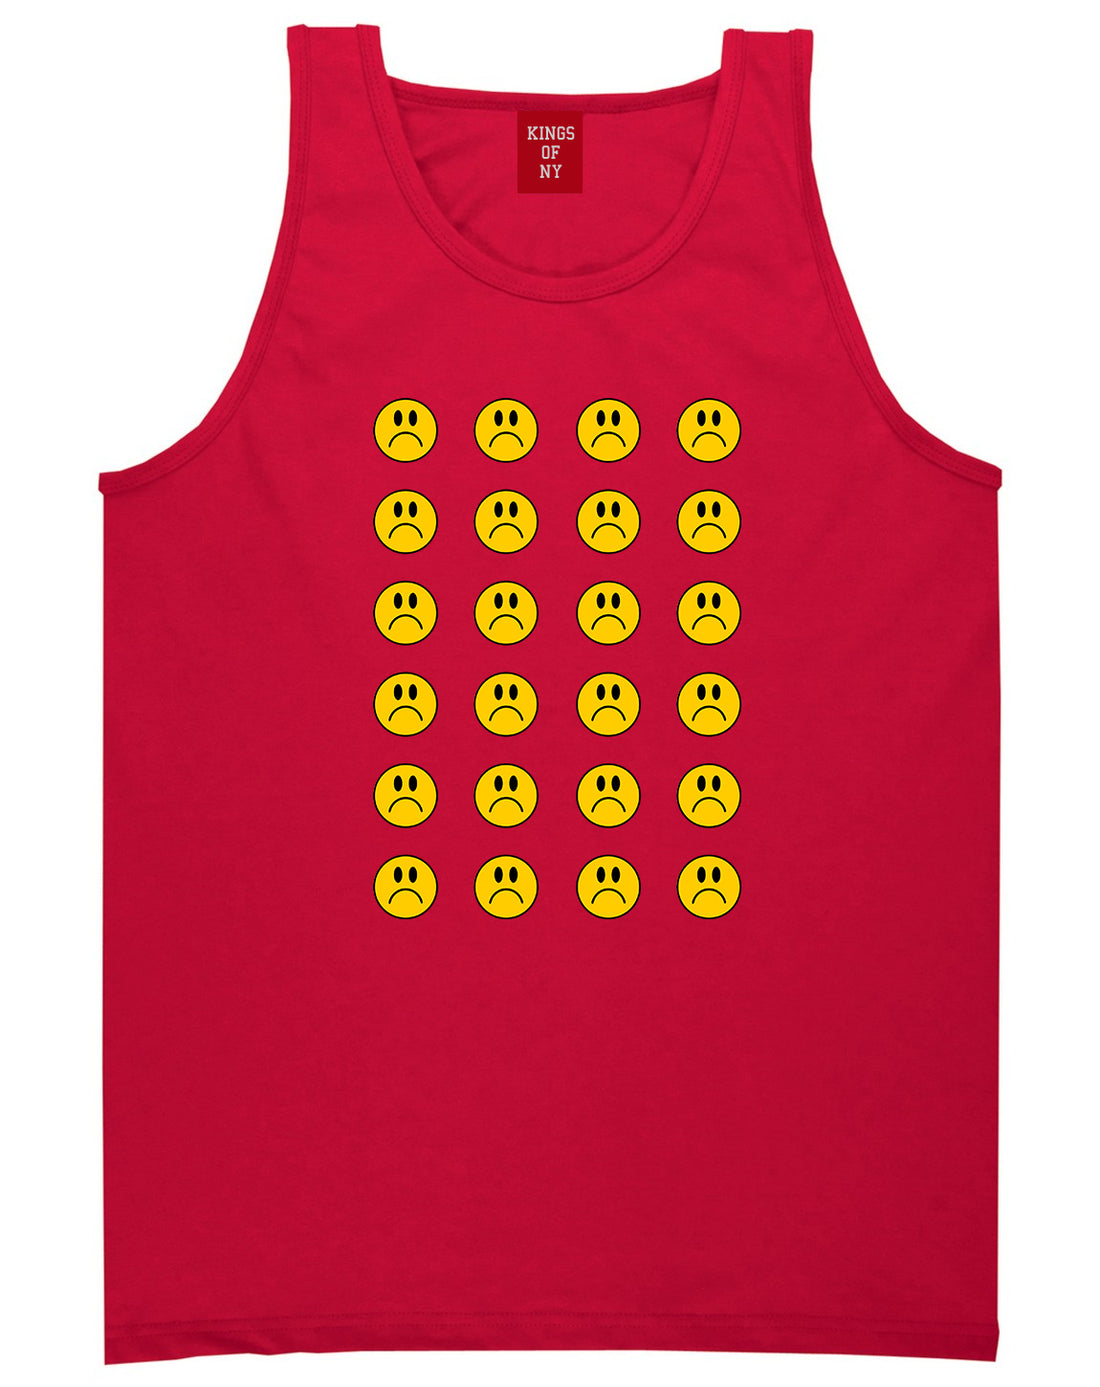 All Over Sad Face Mens Tank Top Shirt Red by Kings Of NY